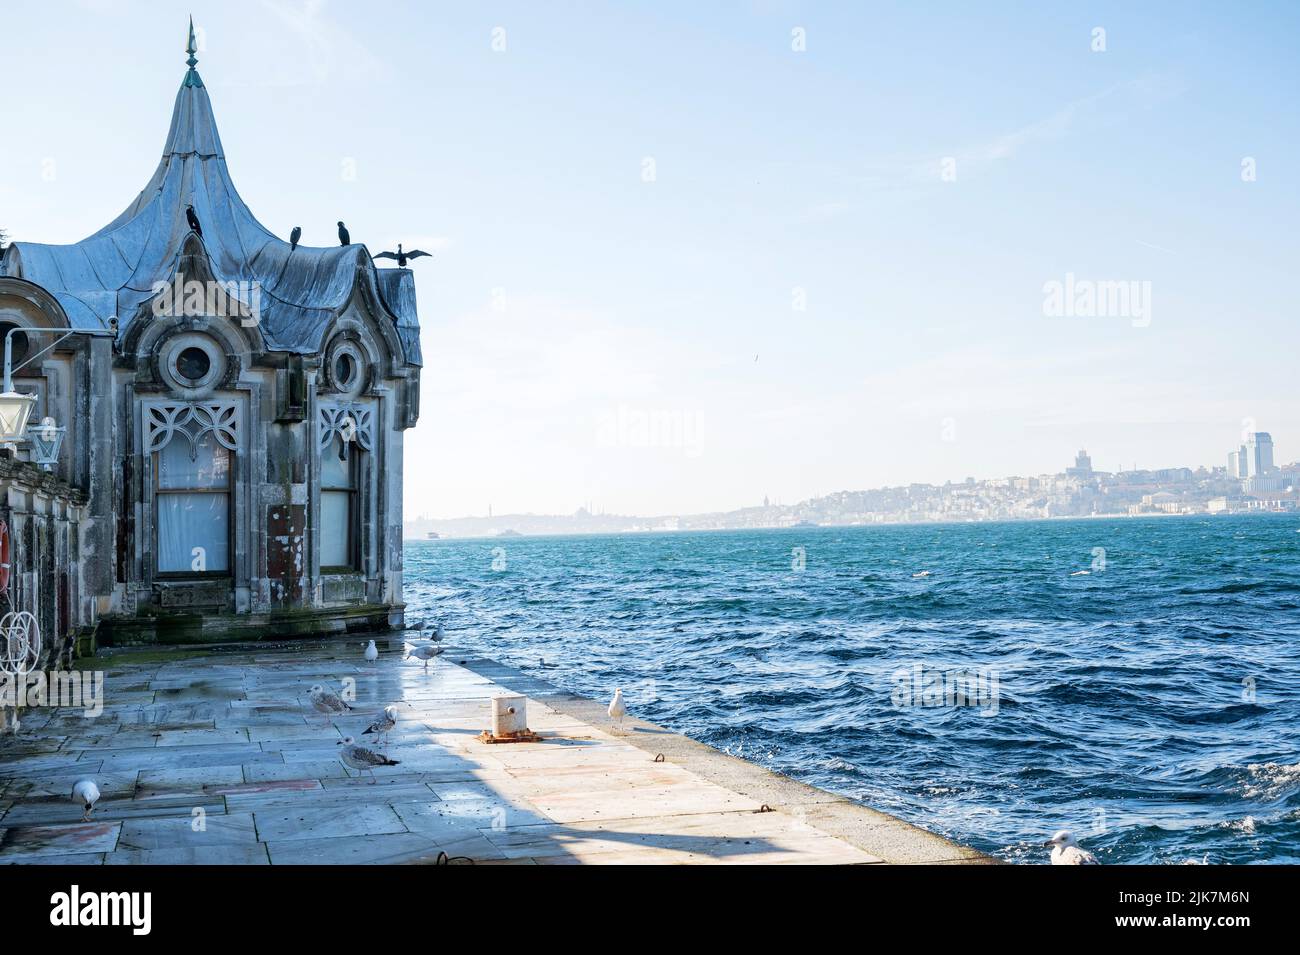 Istanbul, Turkey - Marine pavilion of Beylerbeyi Palace erected in the style of garden gazebos with pointed dome roofs Stock Photo